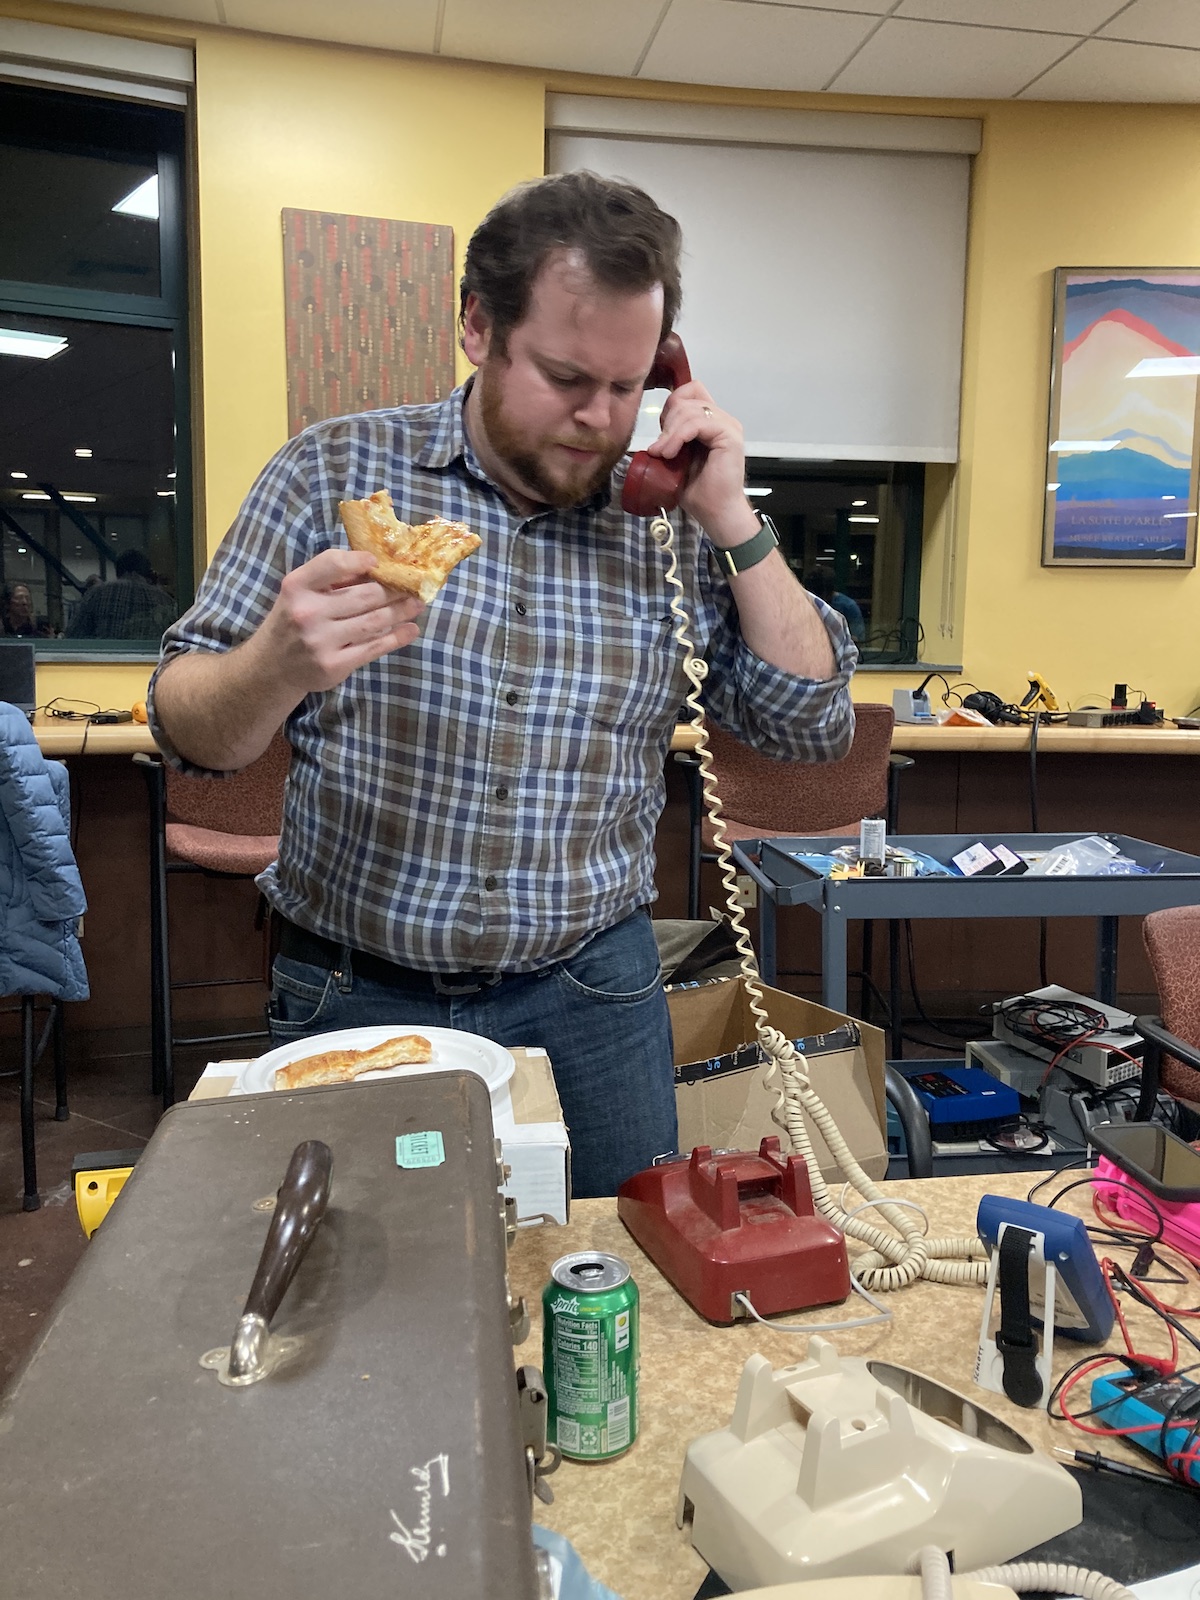 a man holds a slice of pizza and talks into an old school telelphone